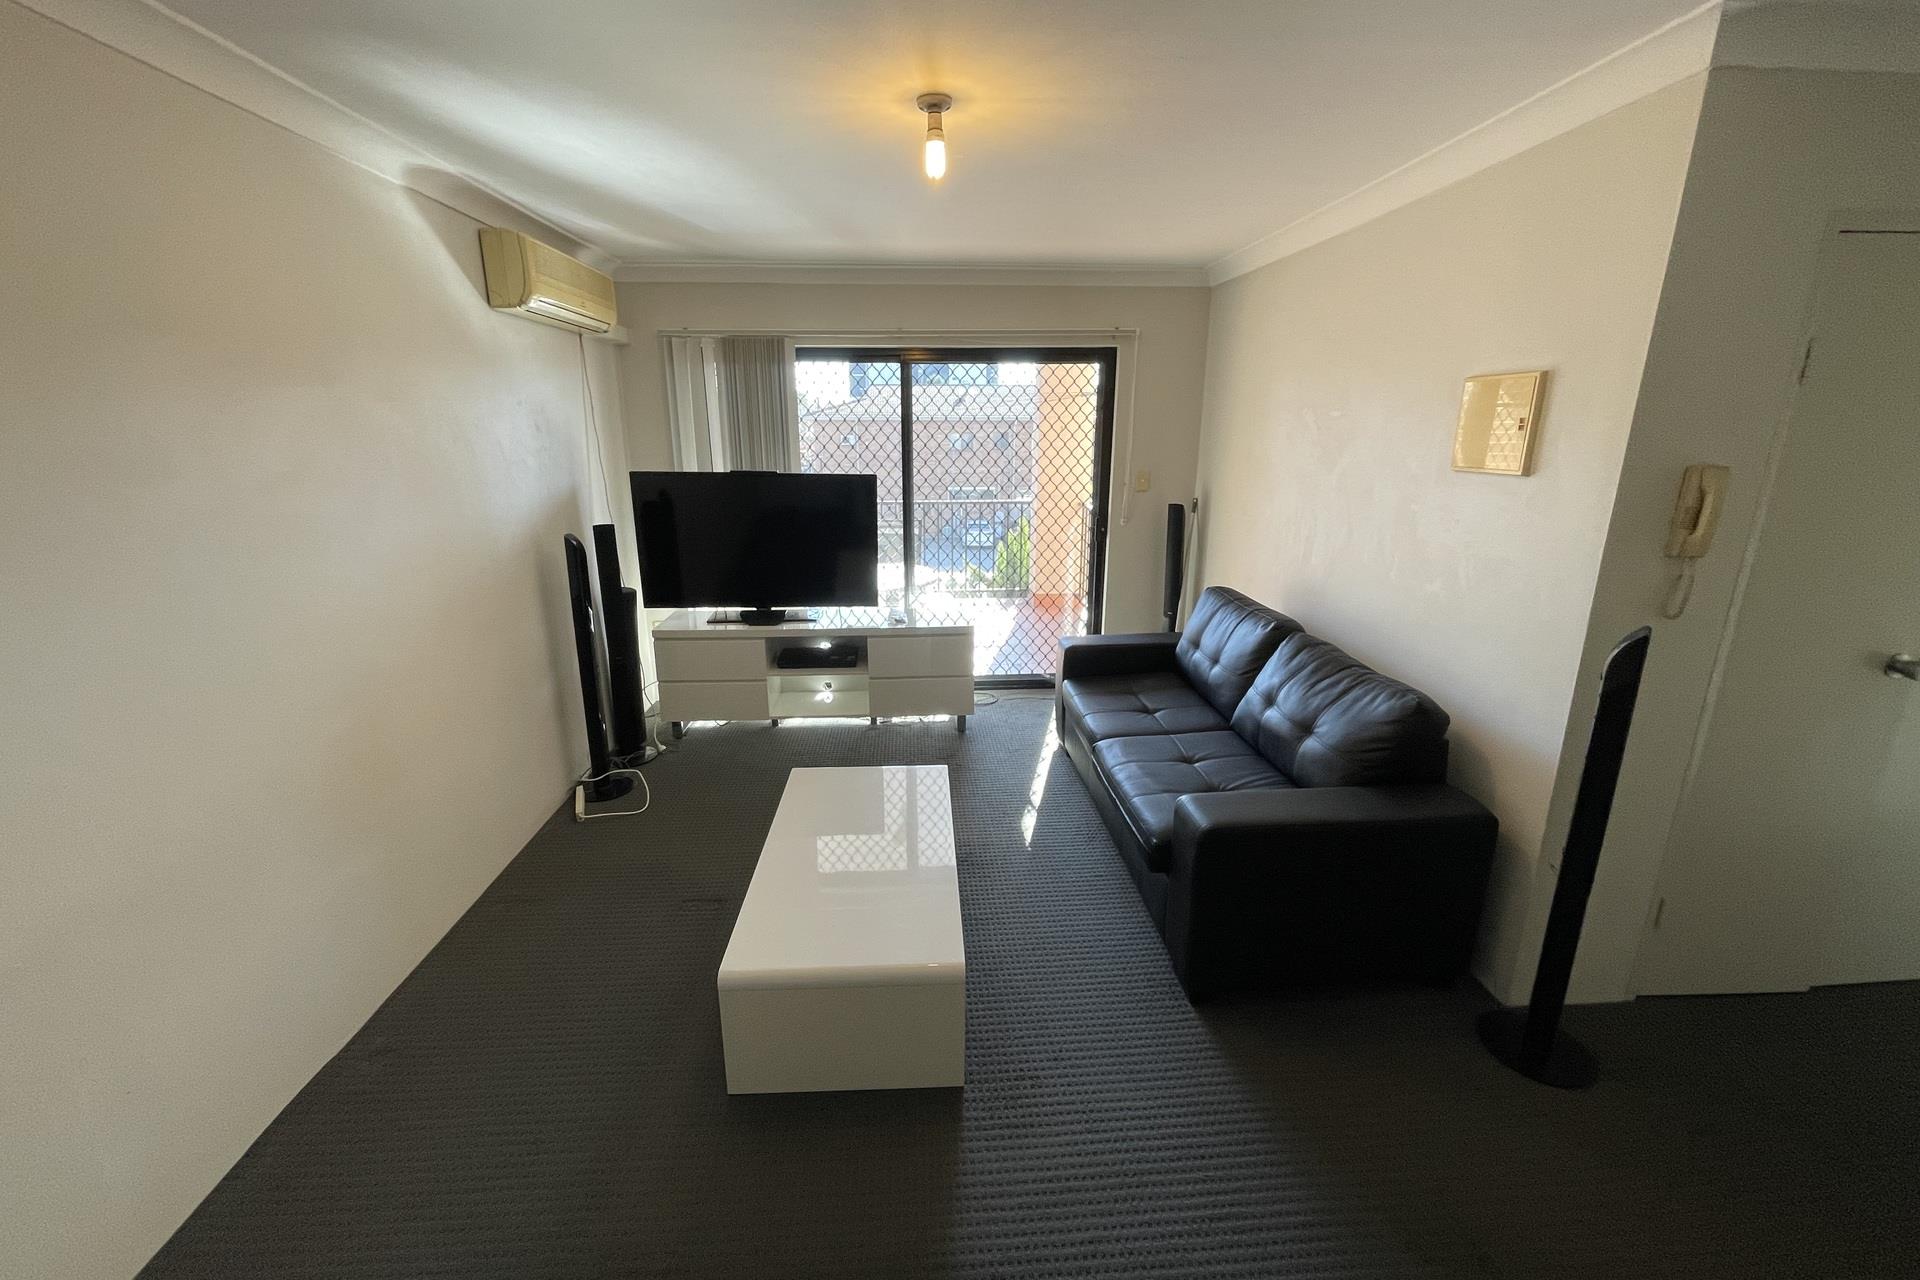 10/96-98 Castlereagh St, Liverpool, NSW 2170